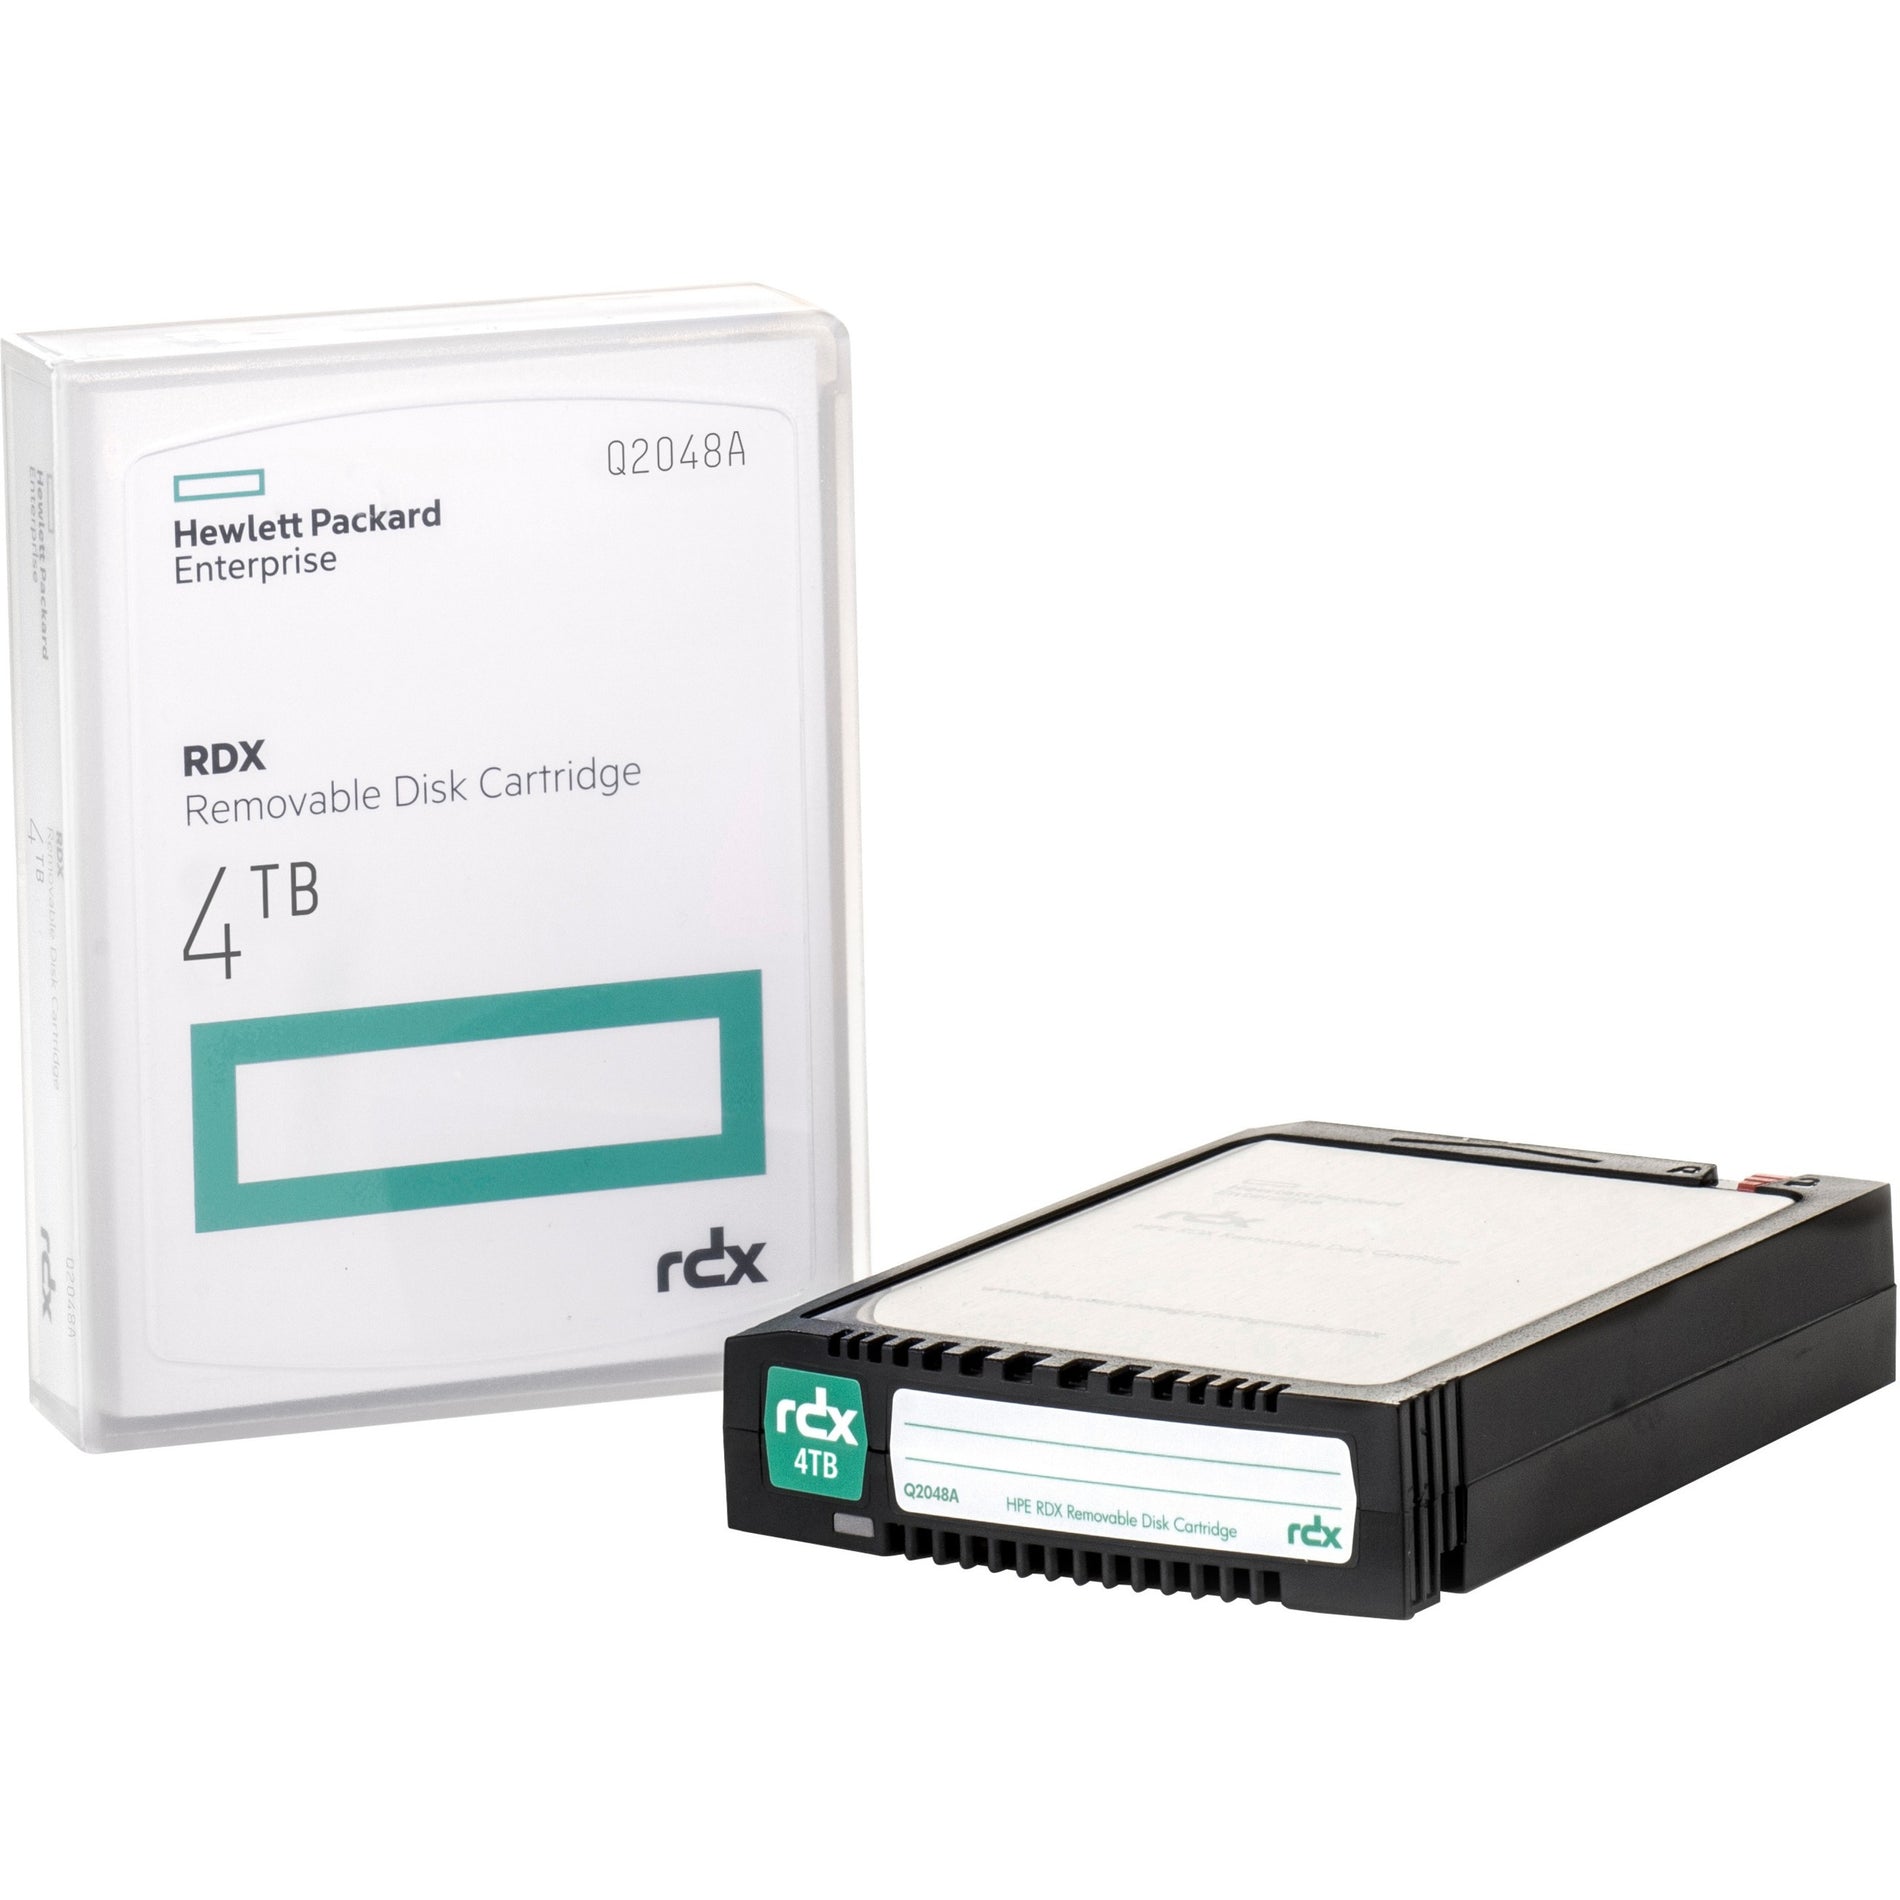 HPE Q2048A RDX 4TB Removable Disk Cartridge, 3 Year Warranty, 5400 RPM, 30 MB/s Transfer Rate